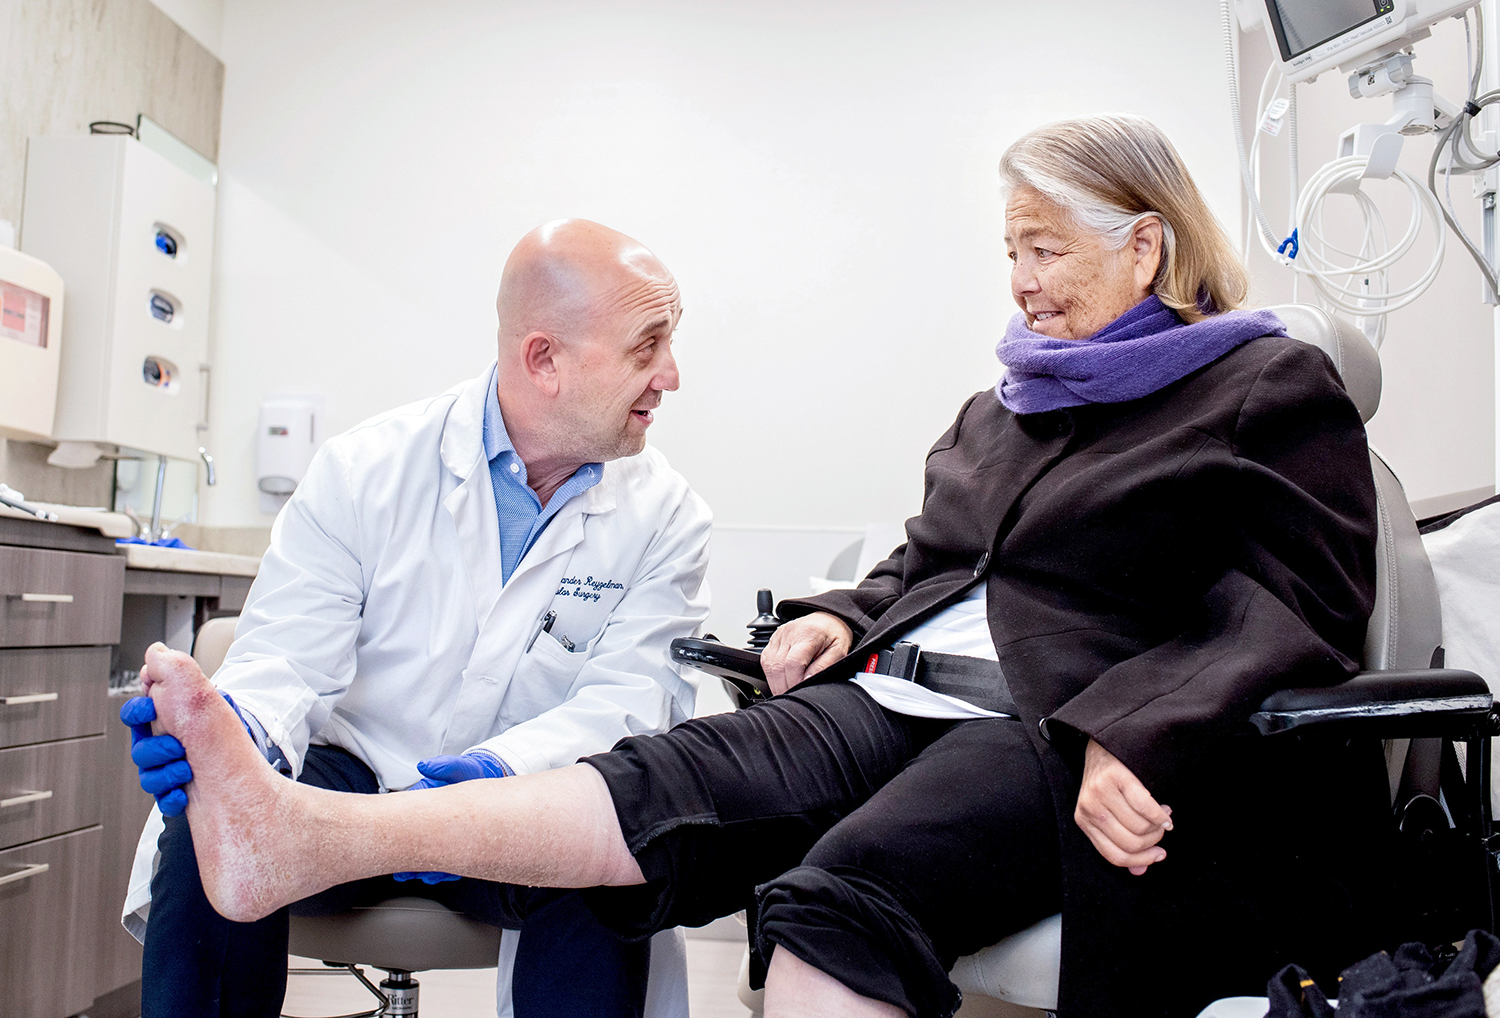 Saving Limbs and Toes From the Grip of Diabetes With Clinic's New Approach  | UC San Francisco